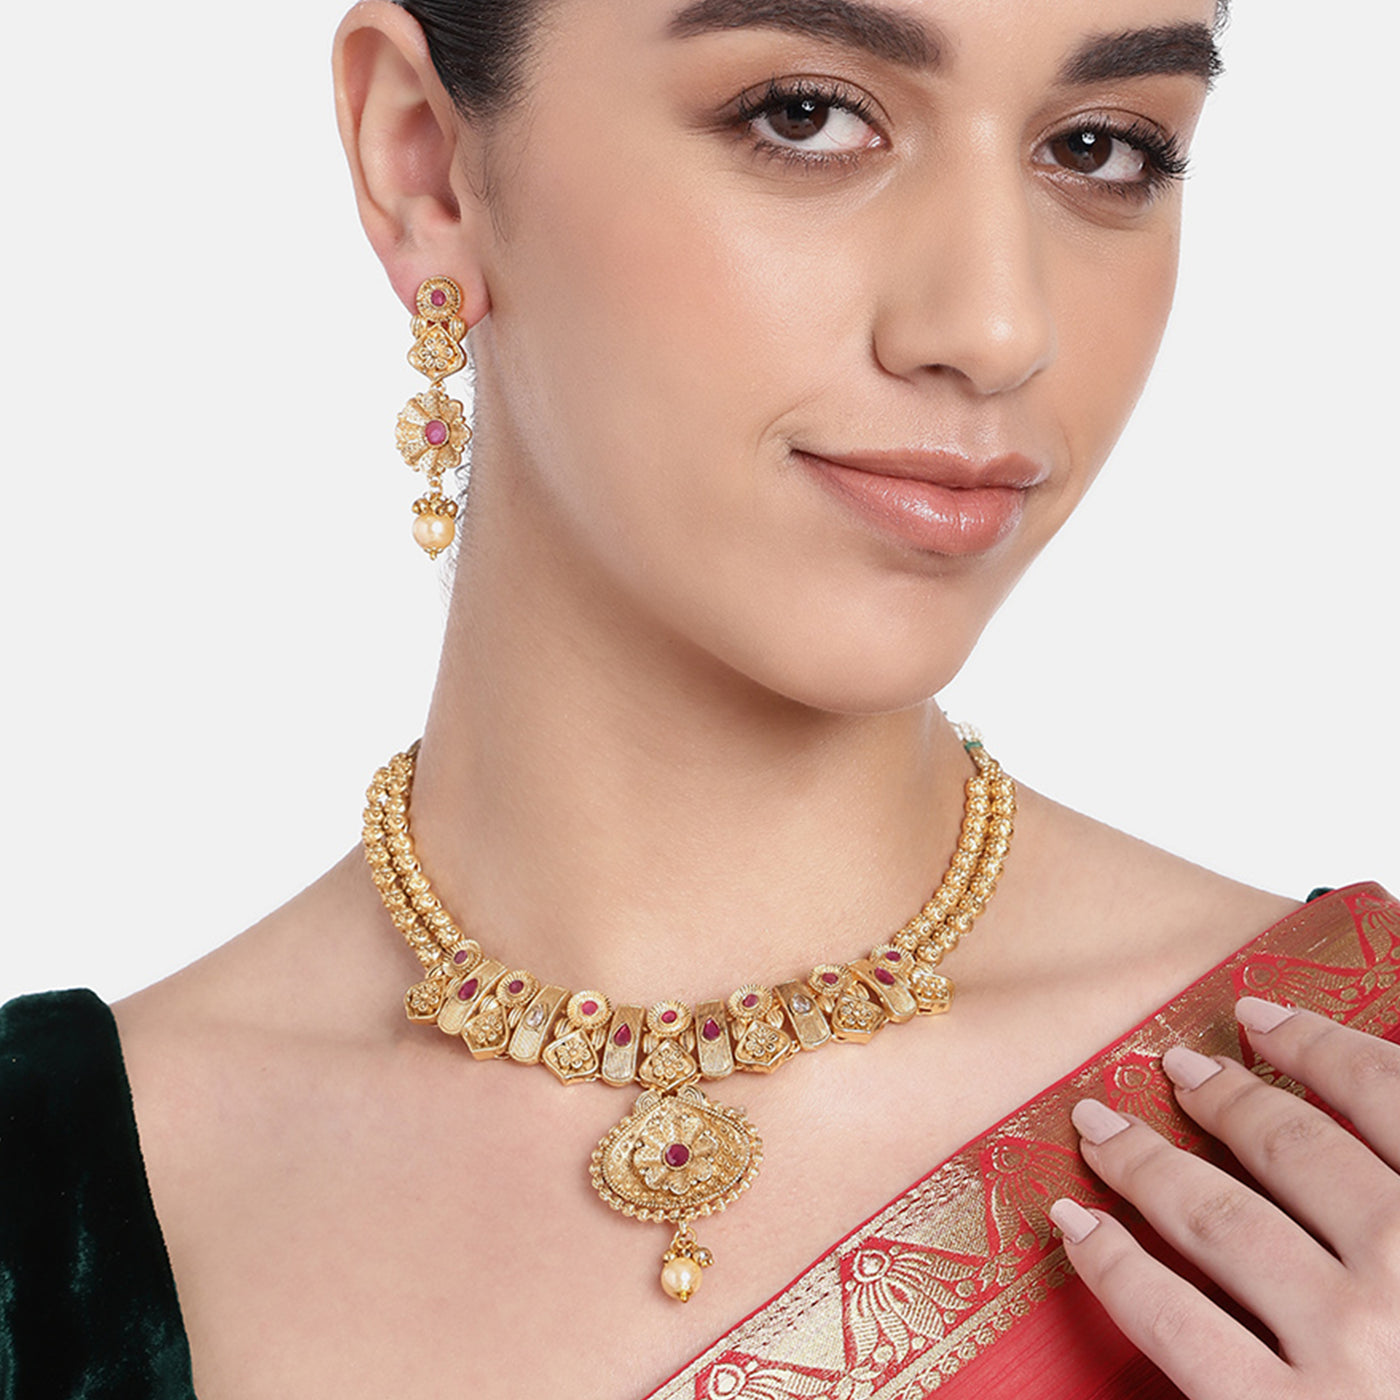 Estele Gold Plated Exquisite Floral Matte Finish Necklace Set with Ruby Crystals & Pearls for Women